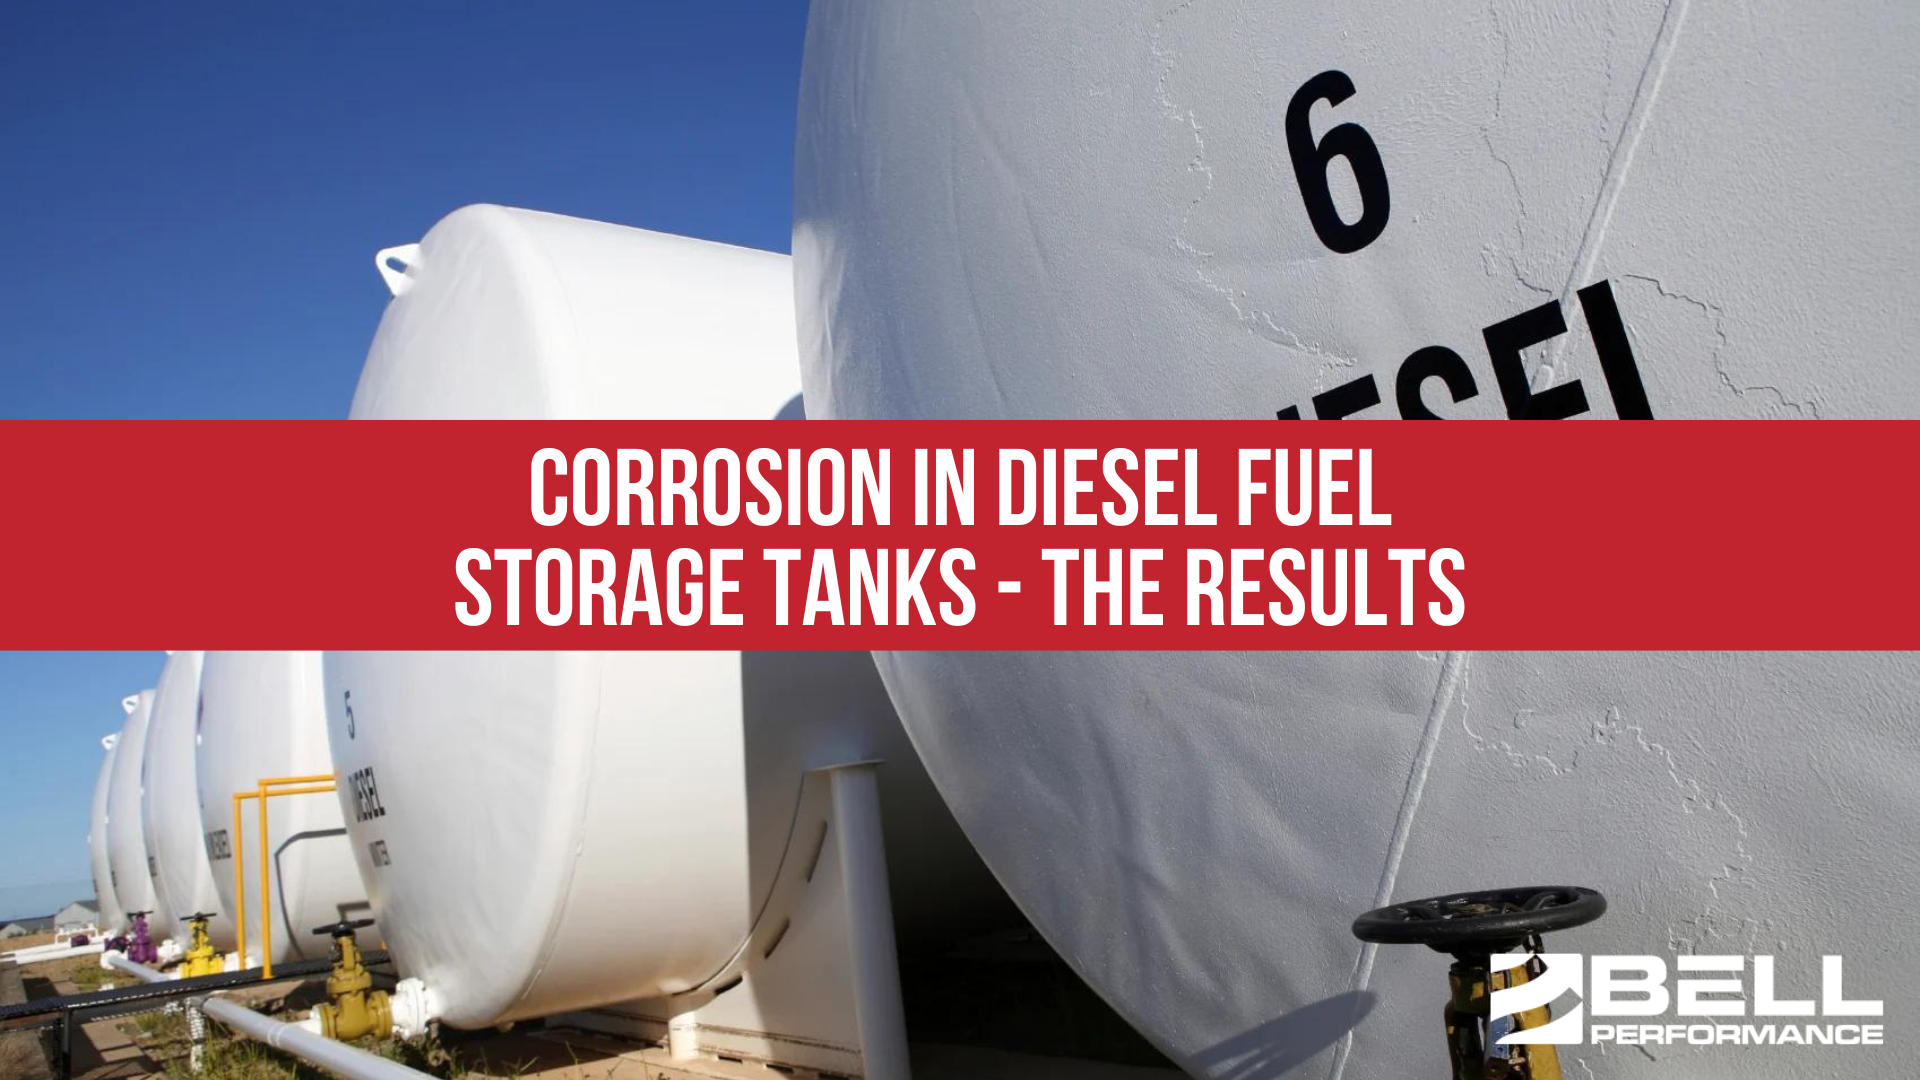 Corrosion in Diesel Fuel Storage Tanks - The Results